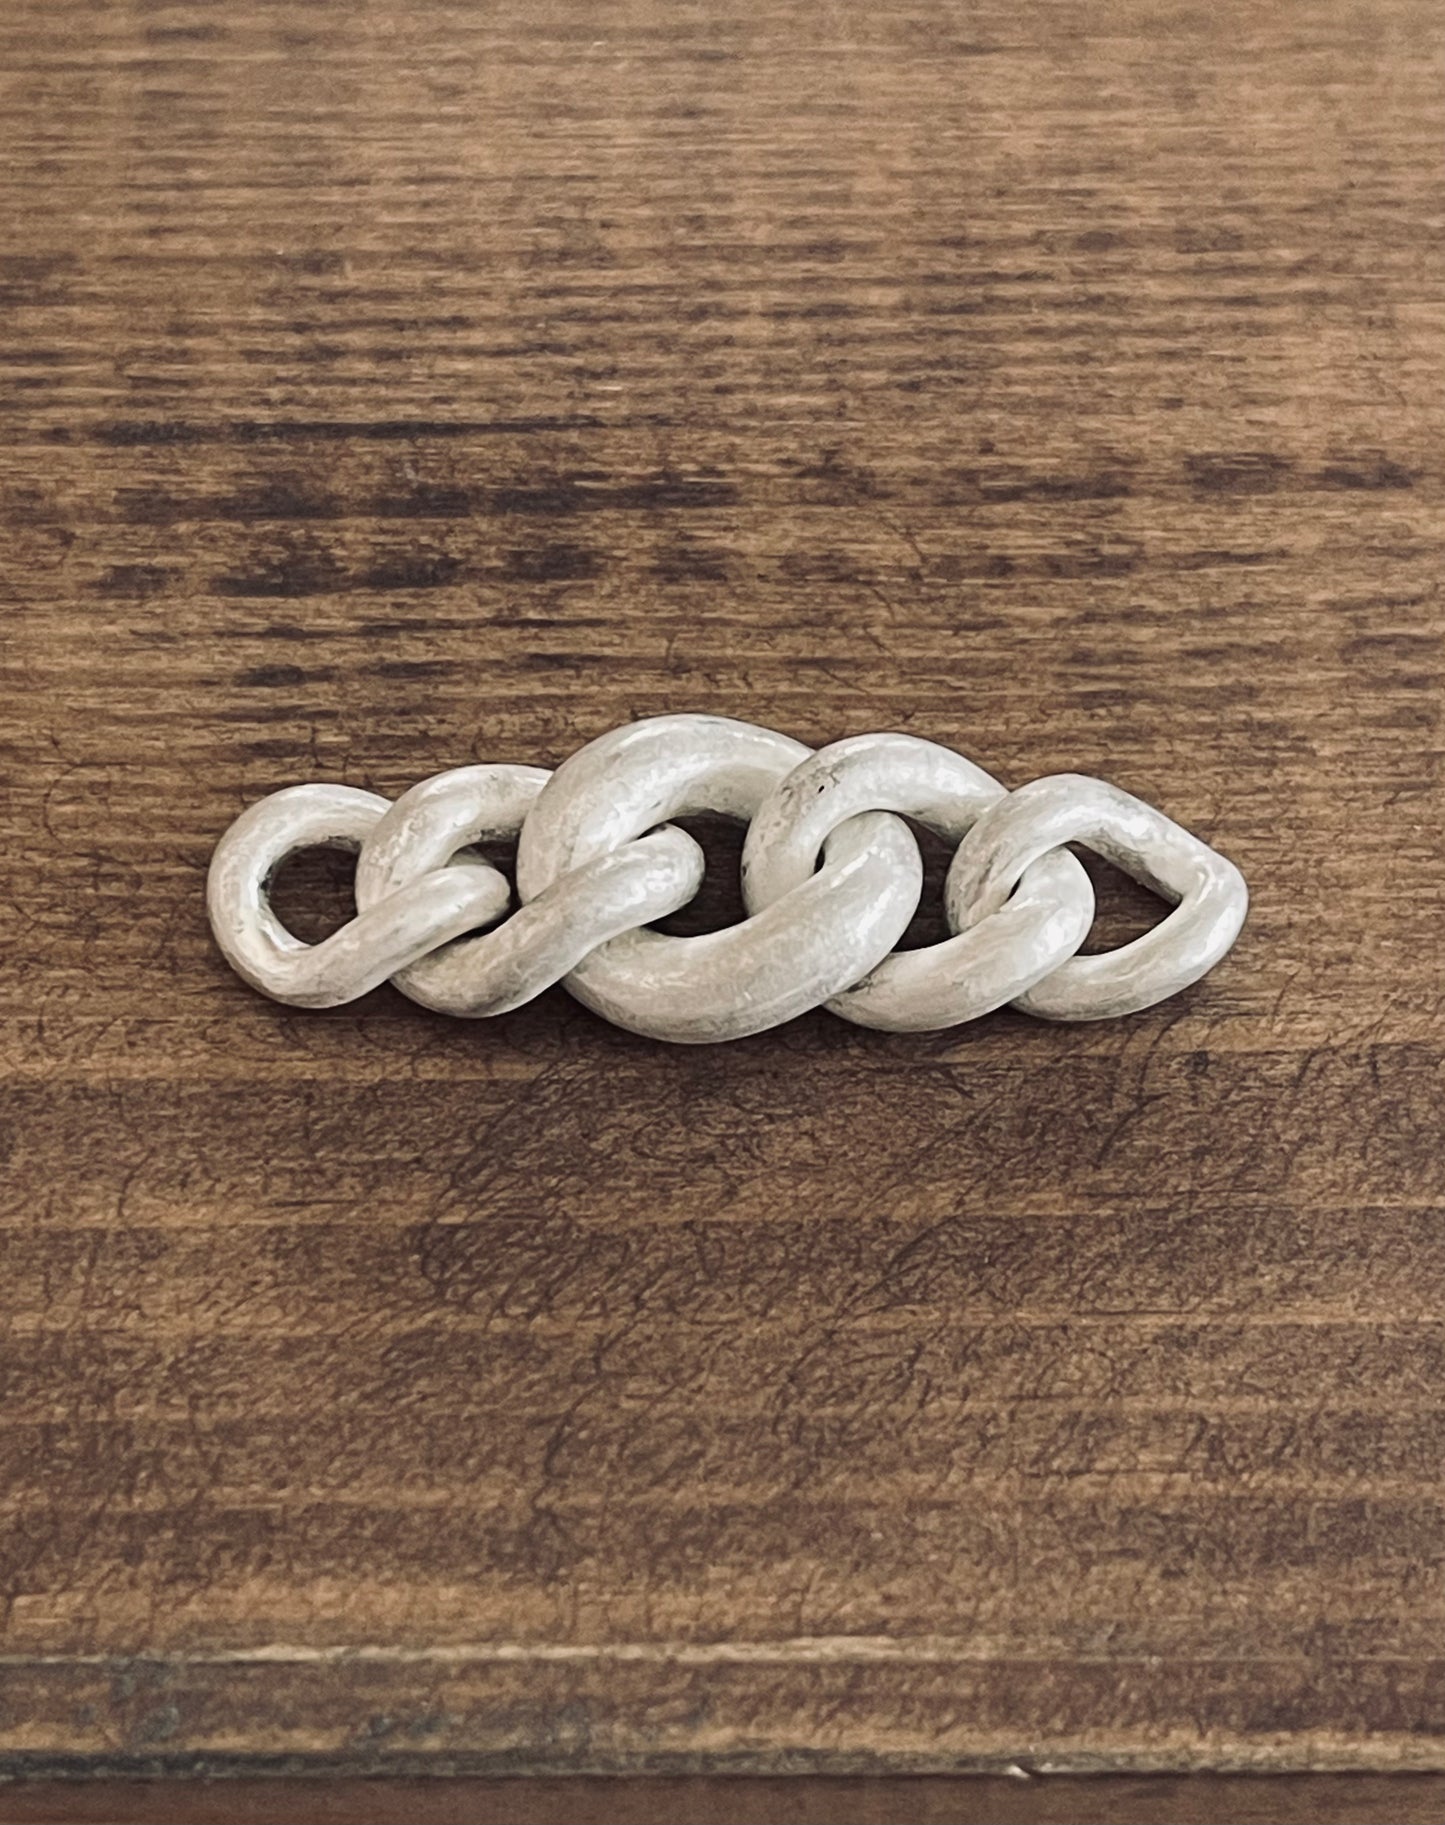 Contrast chain ring